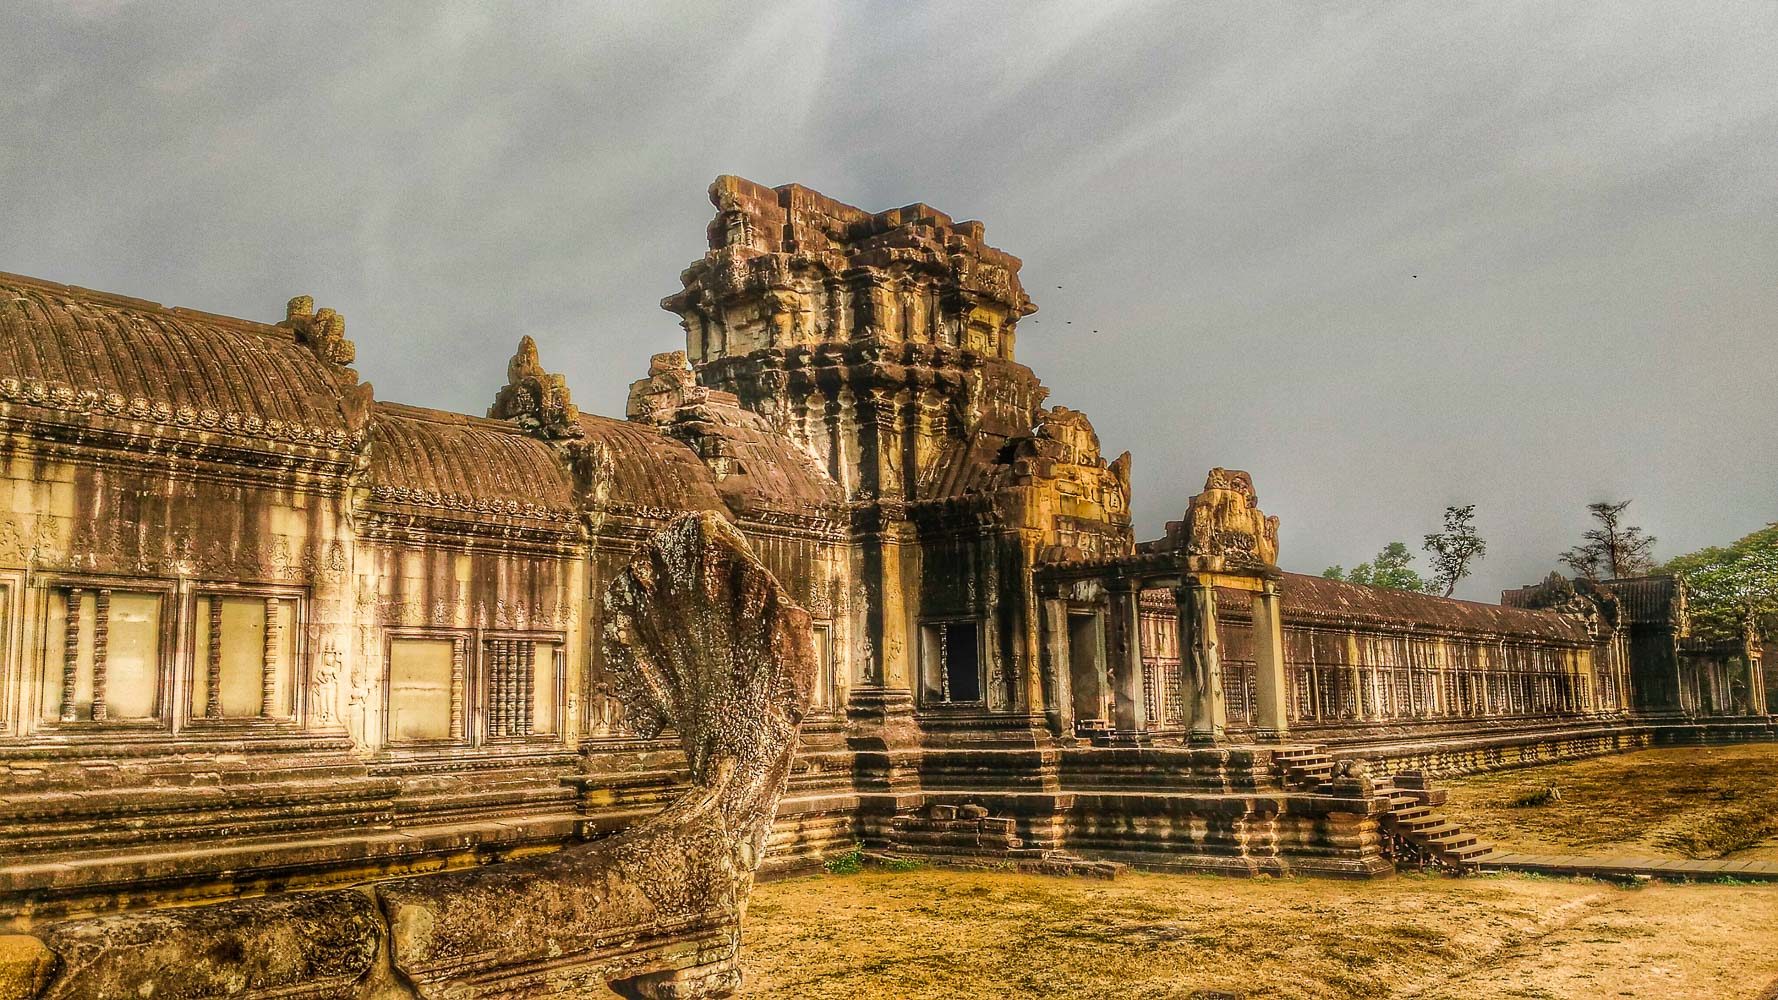 No words can describe the beauty of Angkor Wat 